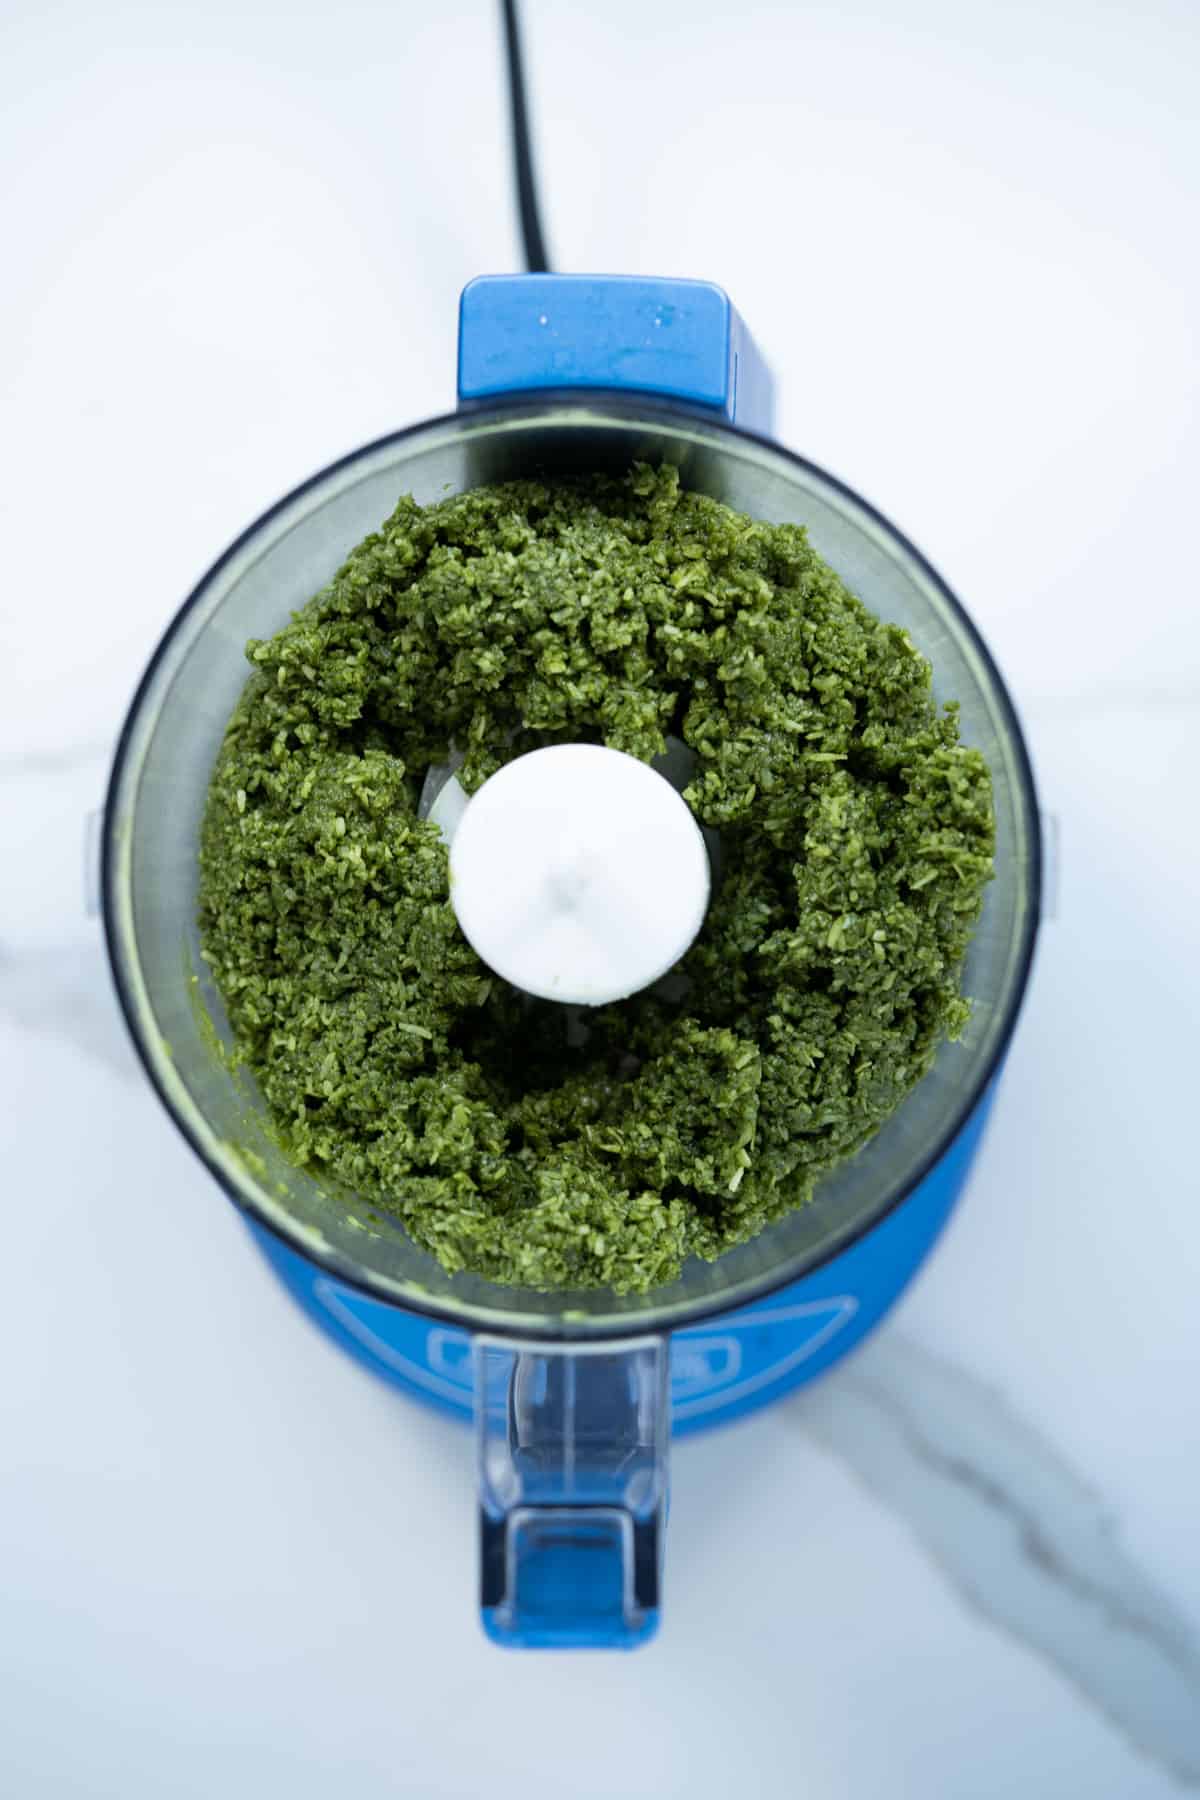 Ingredients for healthy energy bites mixed in food processor